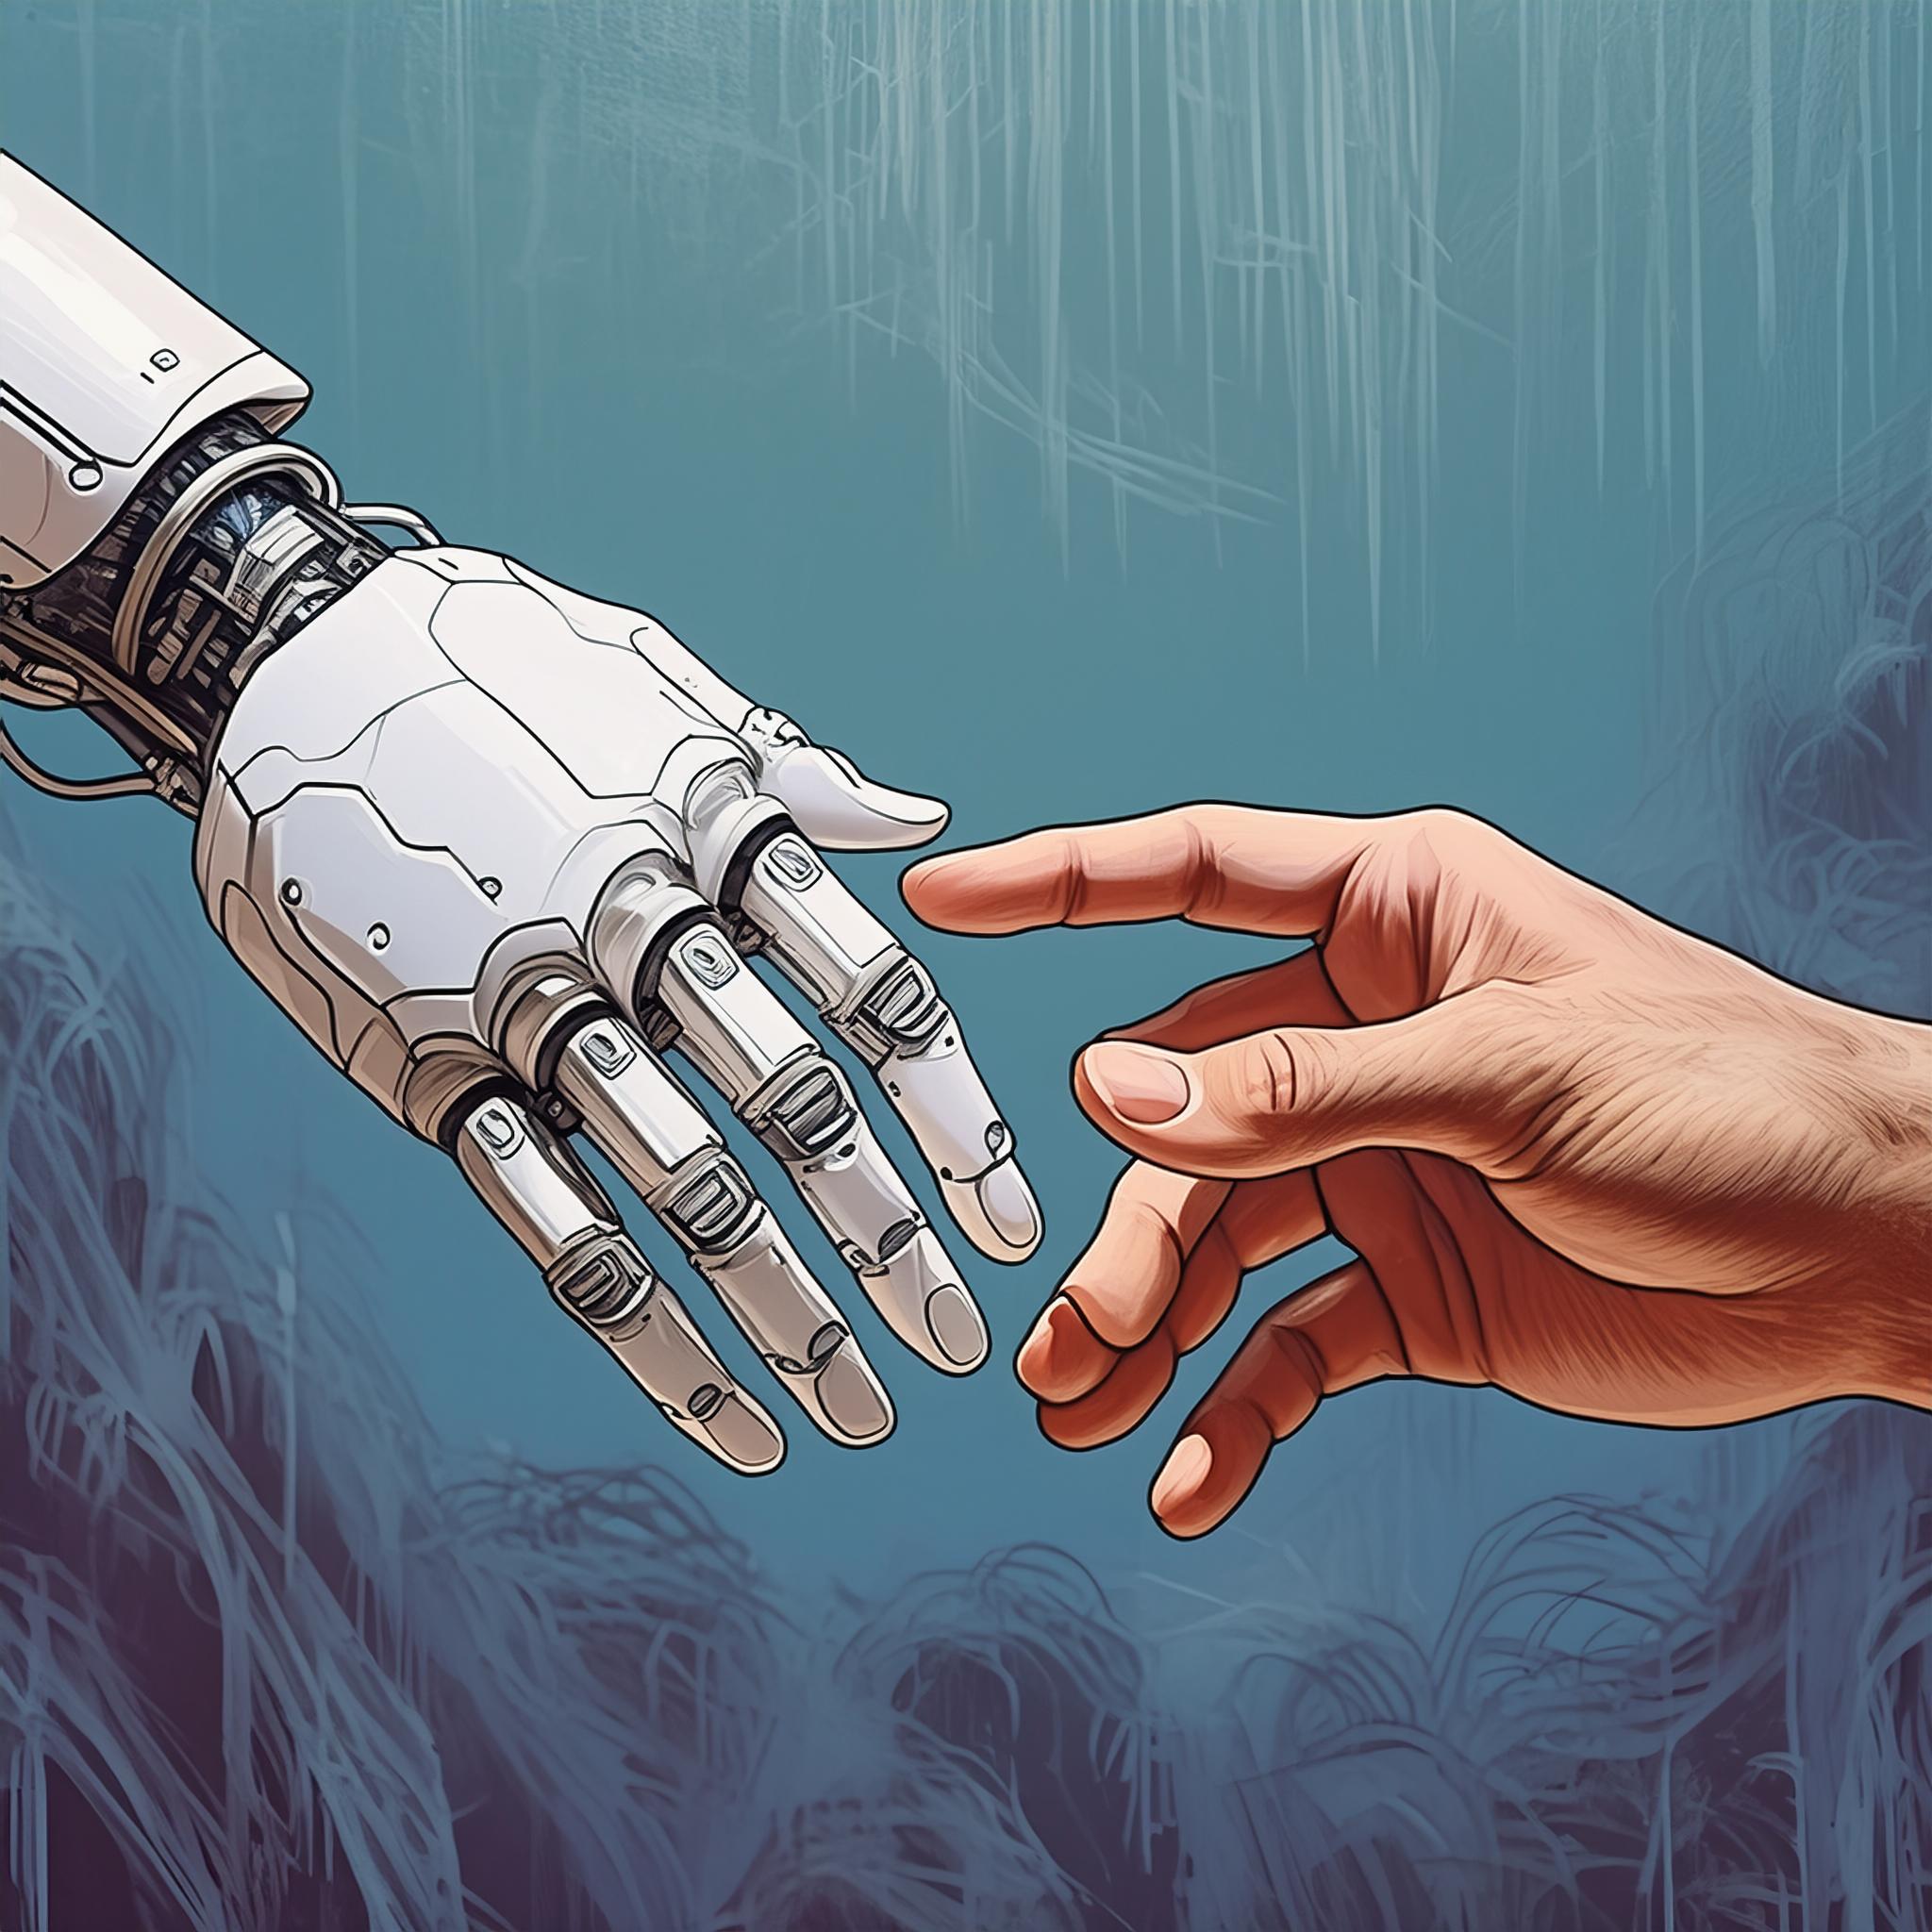 AI-generated image of robot and human hands reaching out to each other